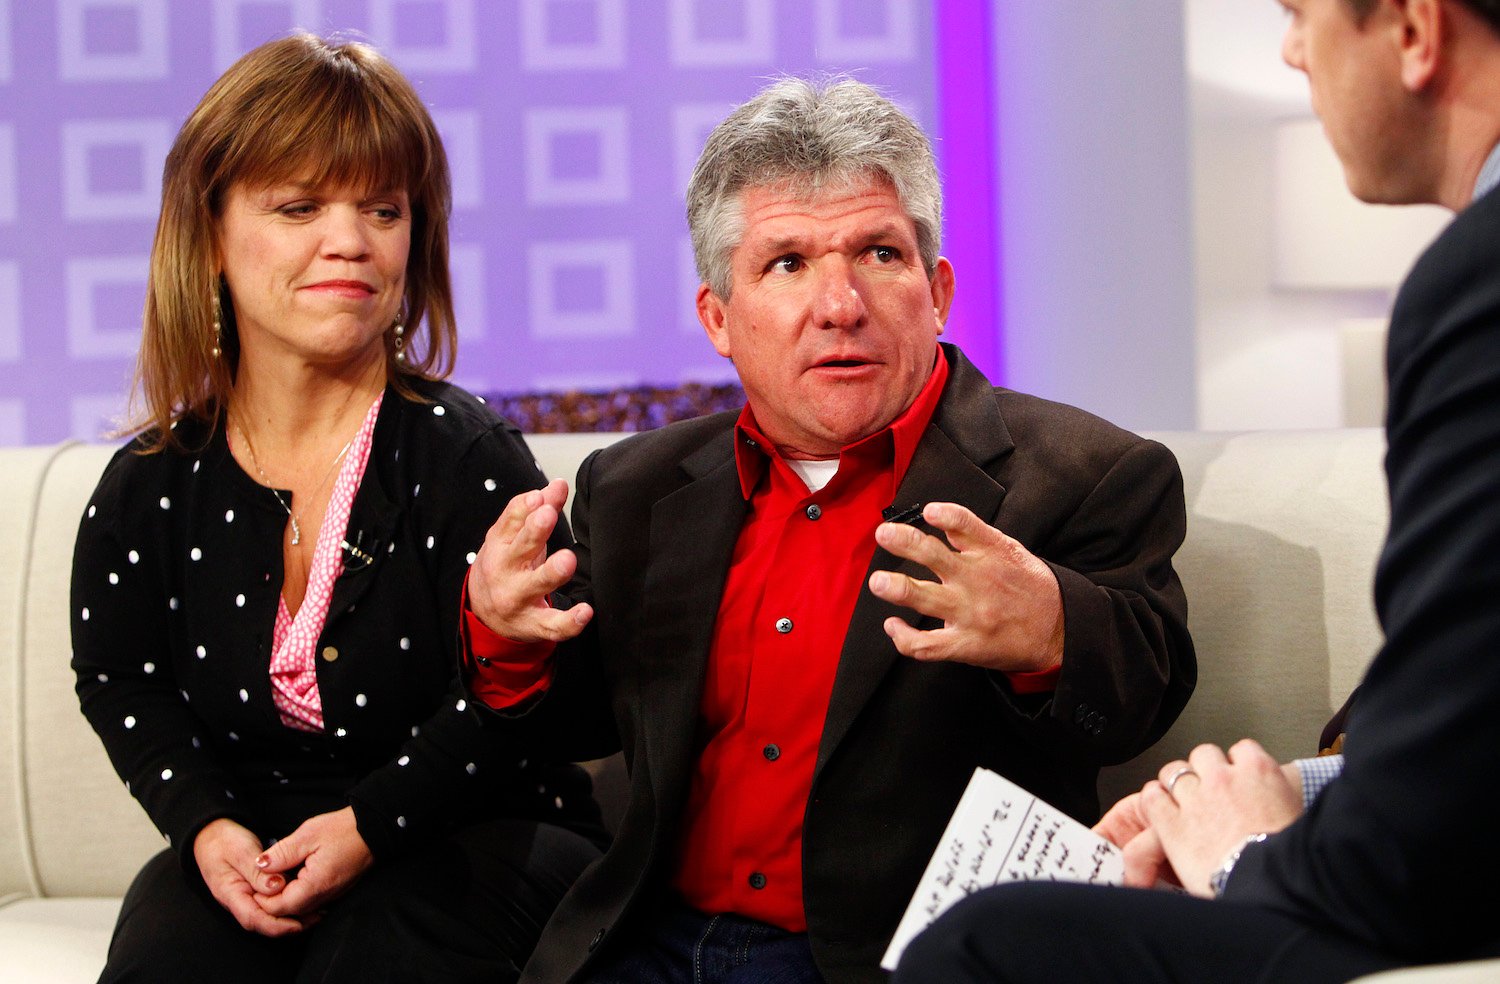 Amy Roloff and Matt Roloff from 'Little People, Big World' talking during an interview